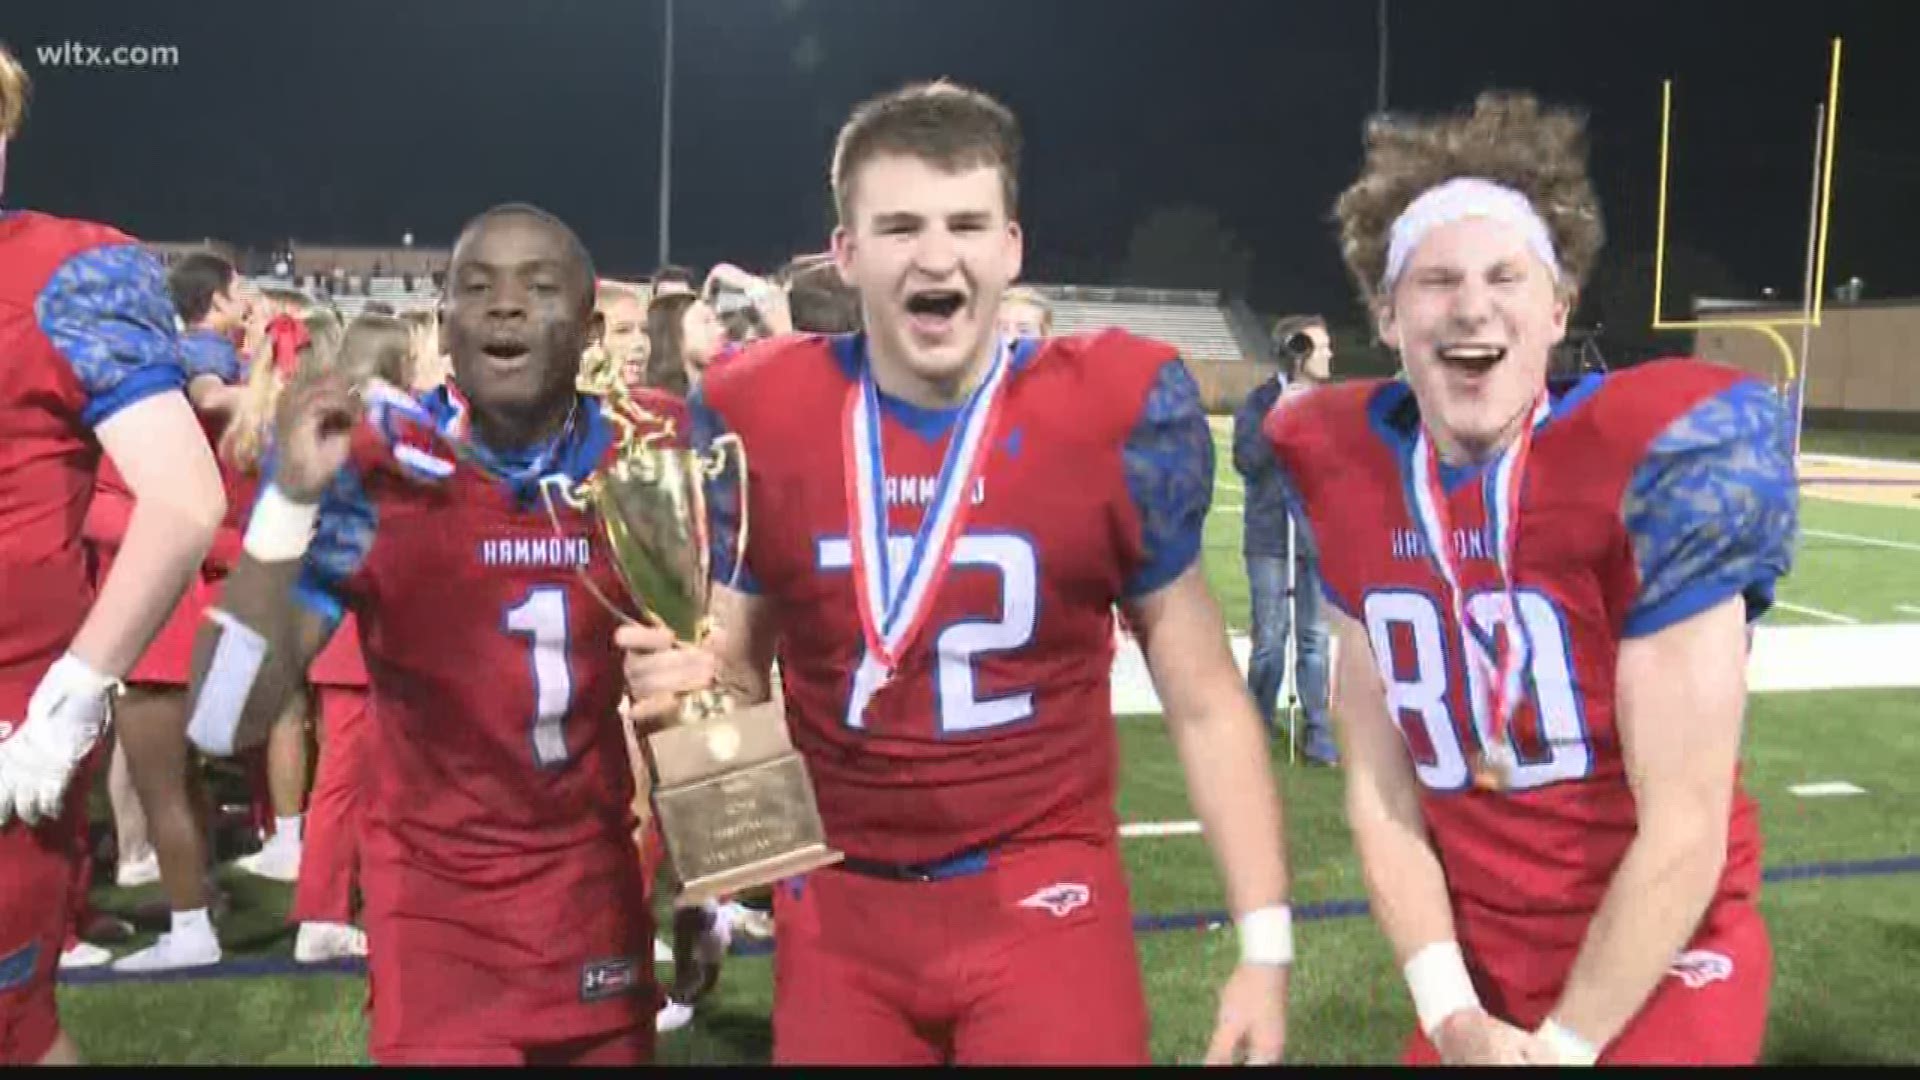 Hammond senior John Elliott Epps capped off his football career by helping the Skyhawks capture their third straight SCISA 3A state title.